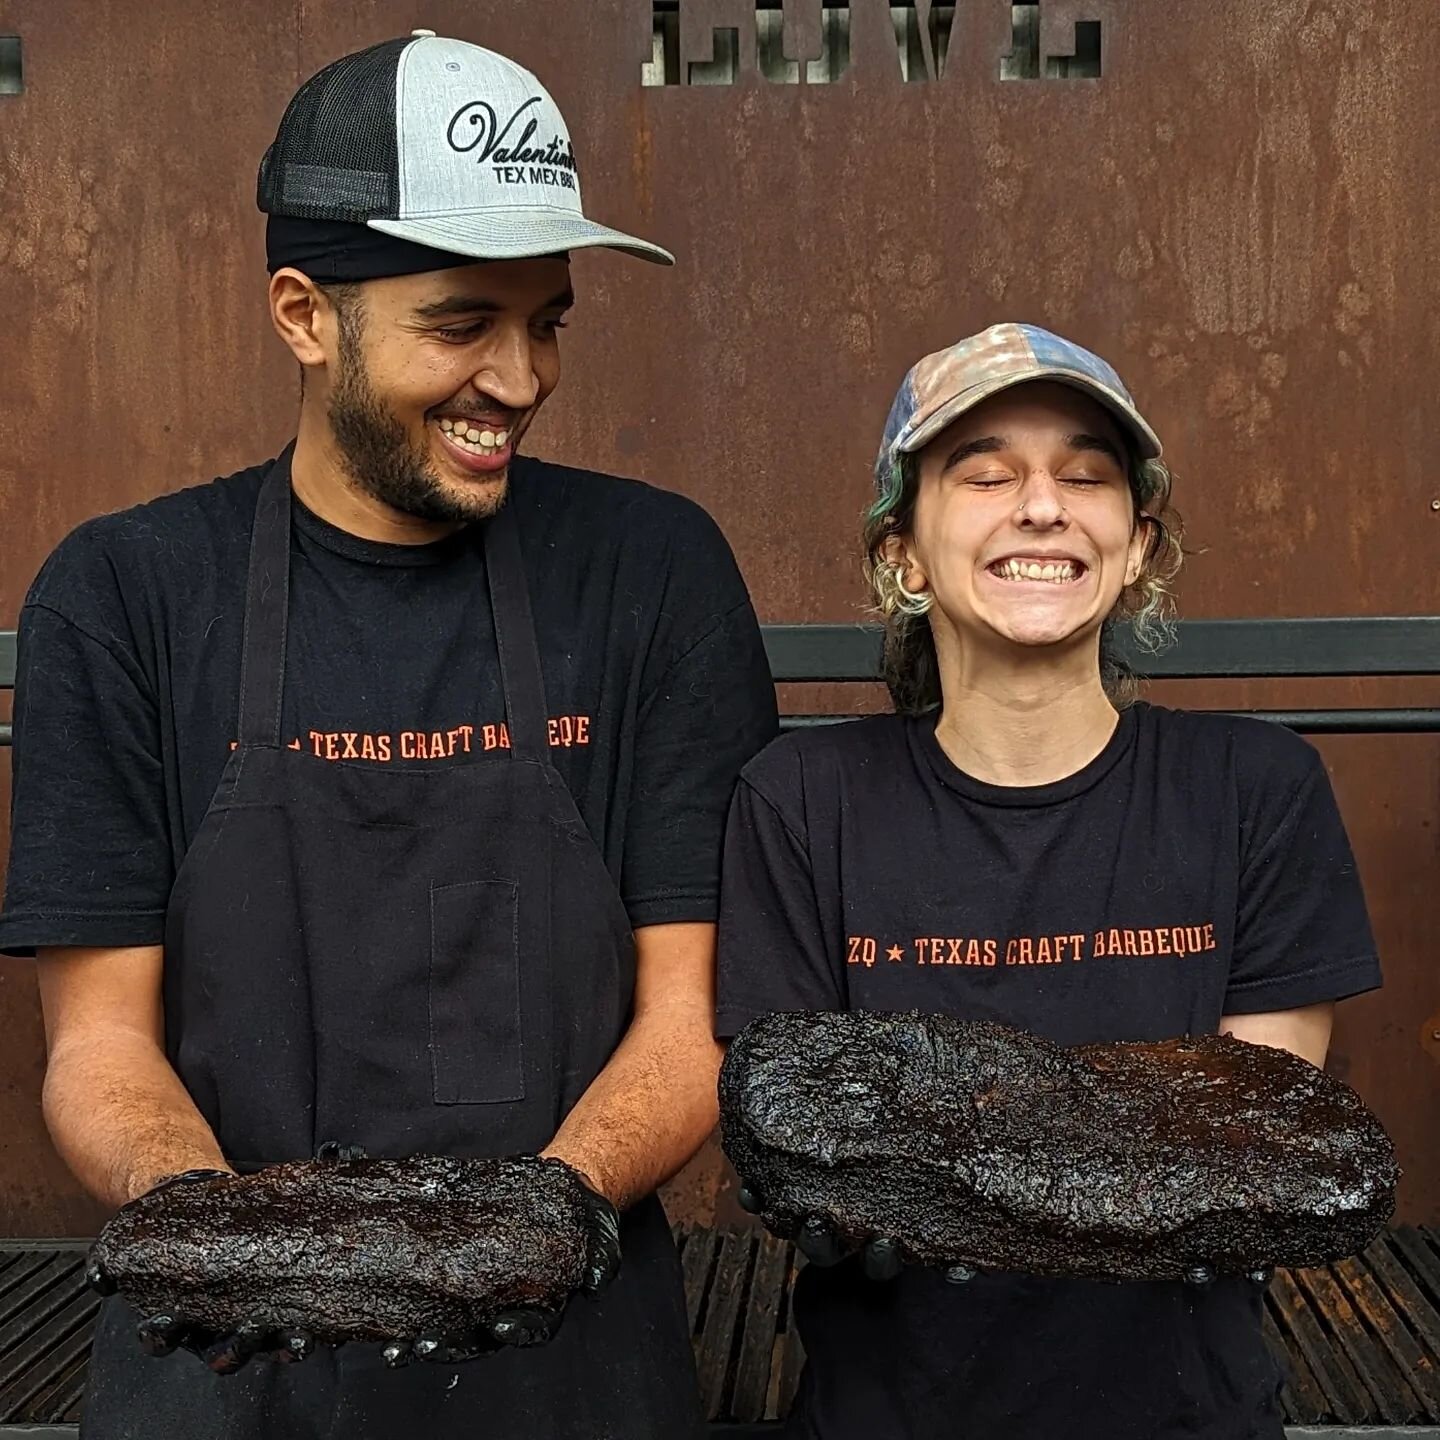 Big or small brisket makes no matter 'cause it's all delicious! Reminder that we are closed today but we gotcha covered for your post Thanksgiving BBQ fix tomorrow- doors open Saturday at 11AM. See ya soon!